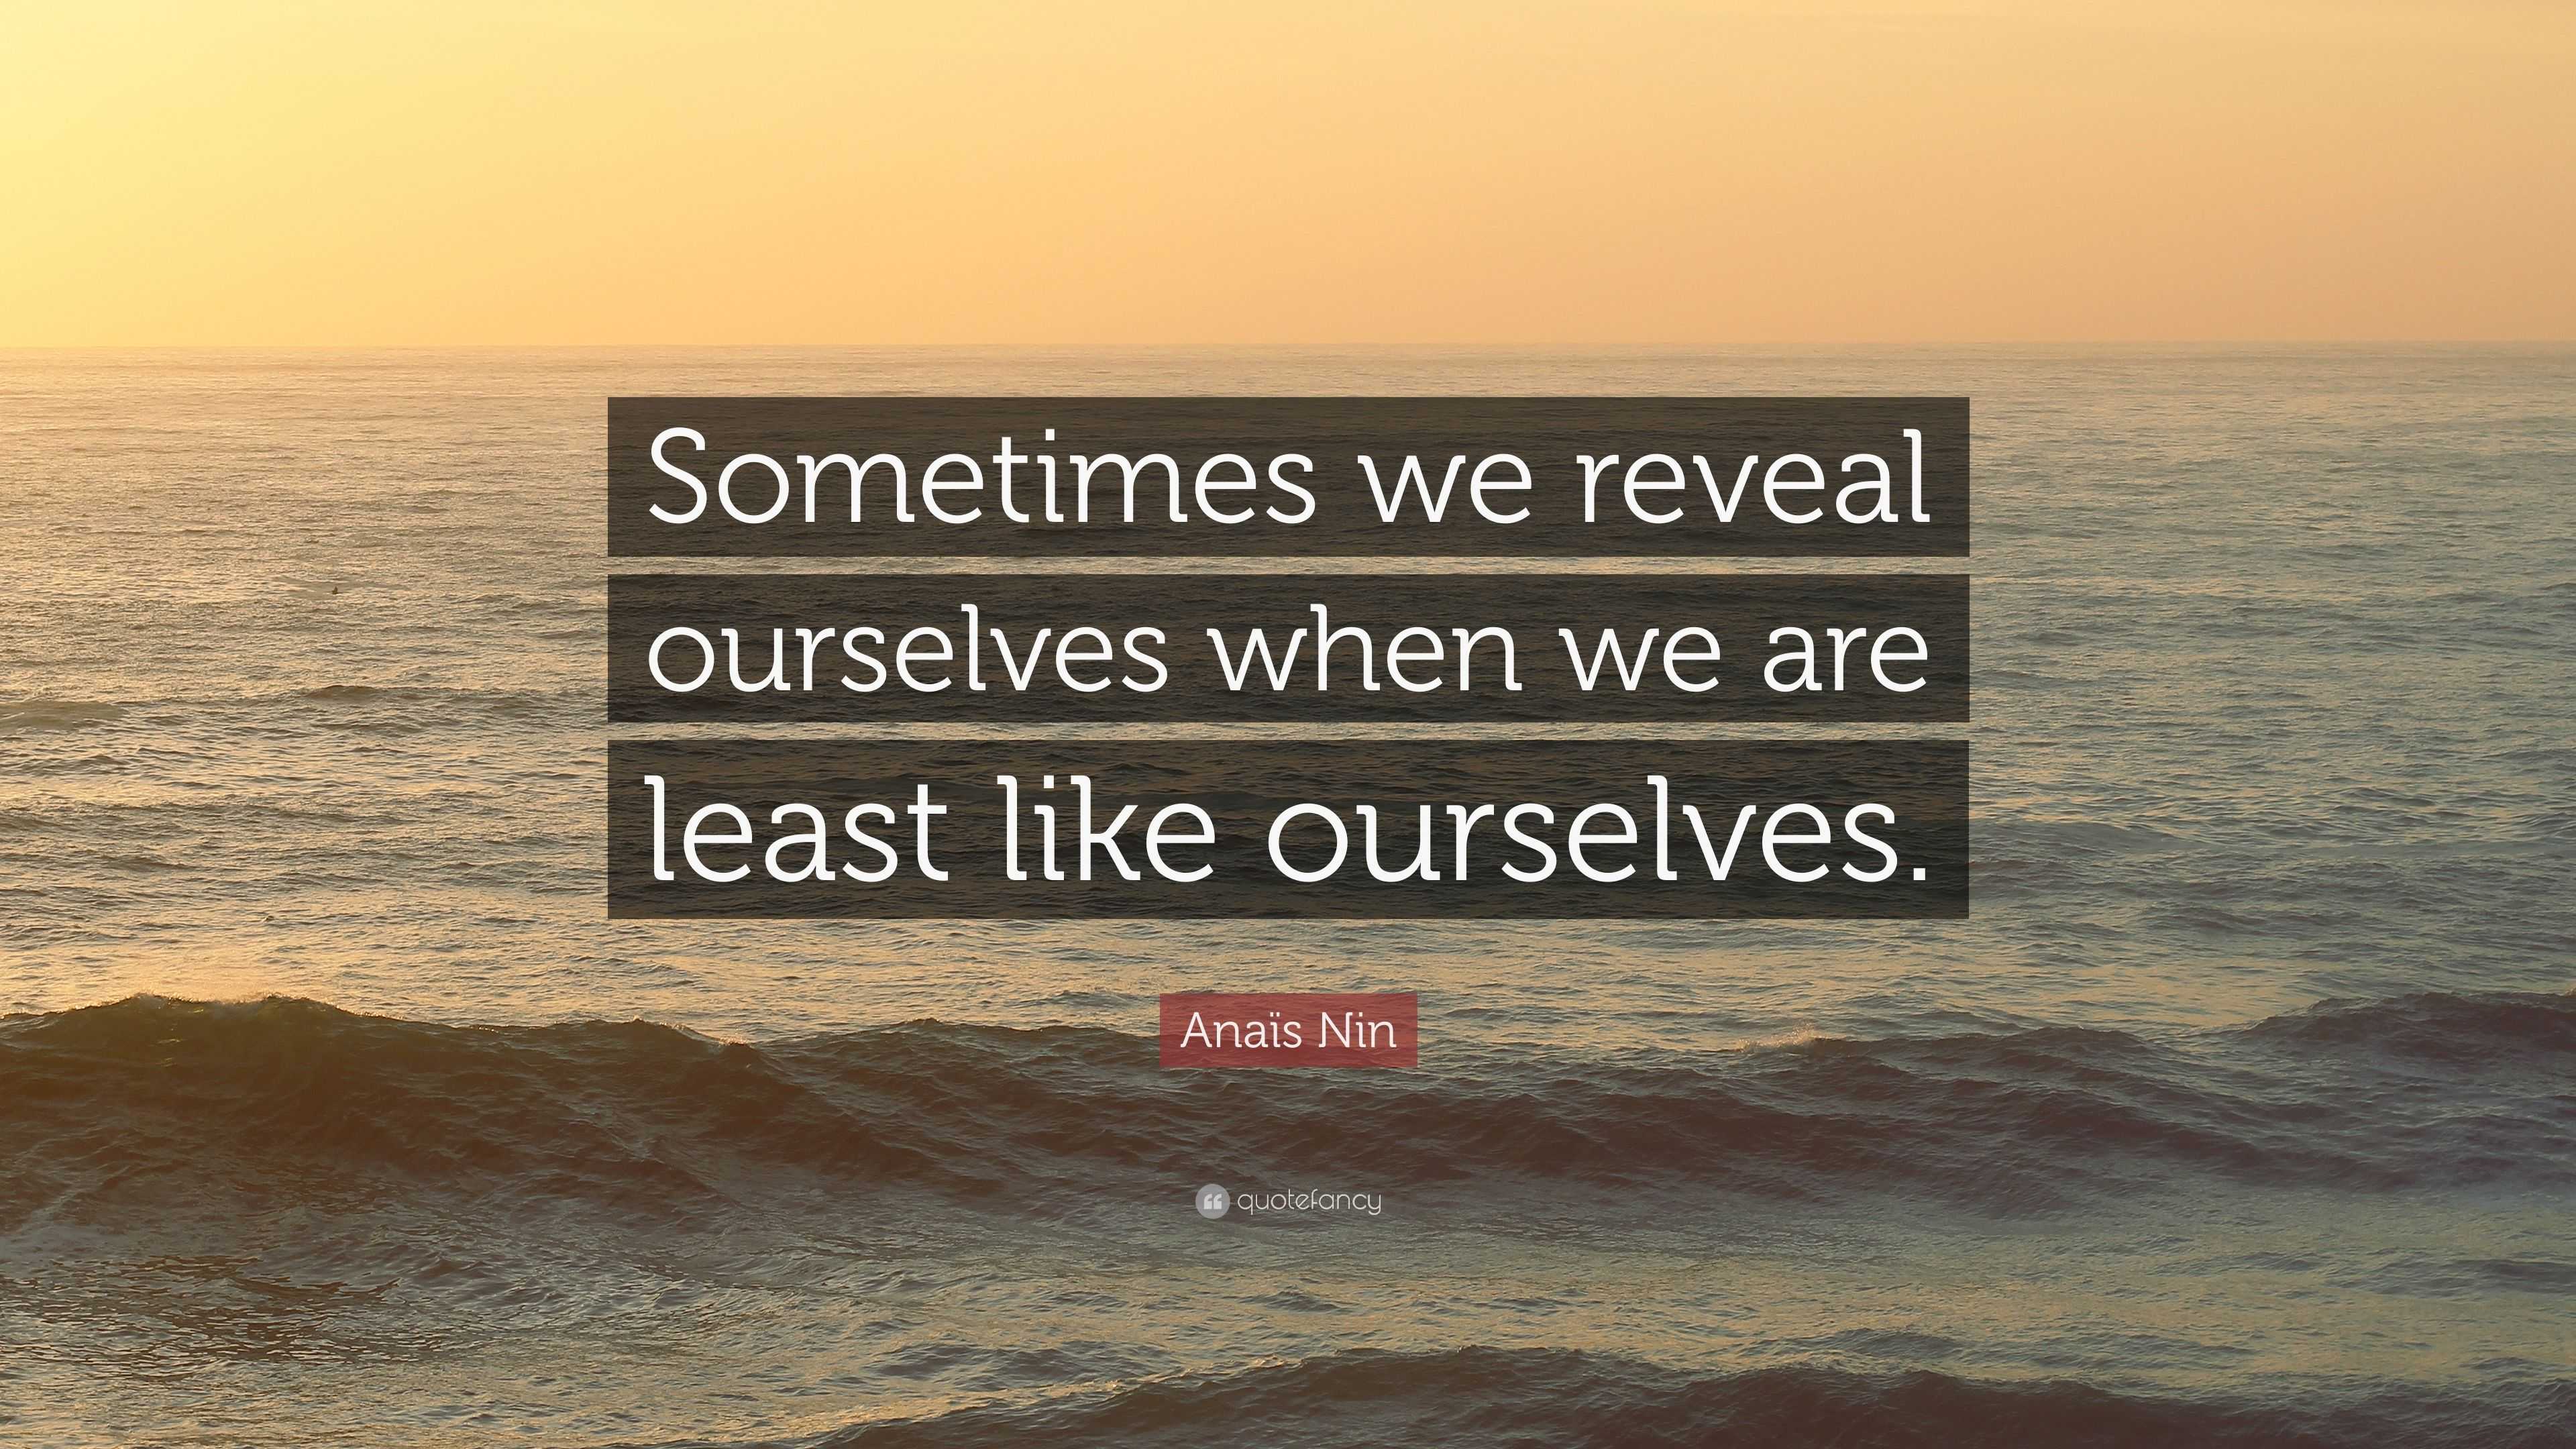 Anaïs Nin Quote: “Sometimes we reveal ourselves when we are least like ...